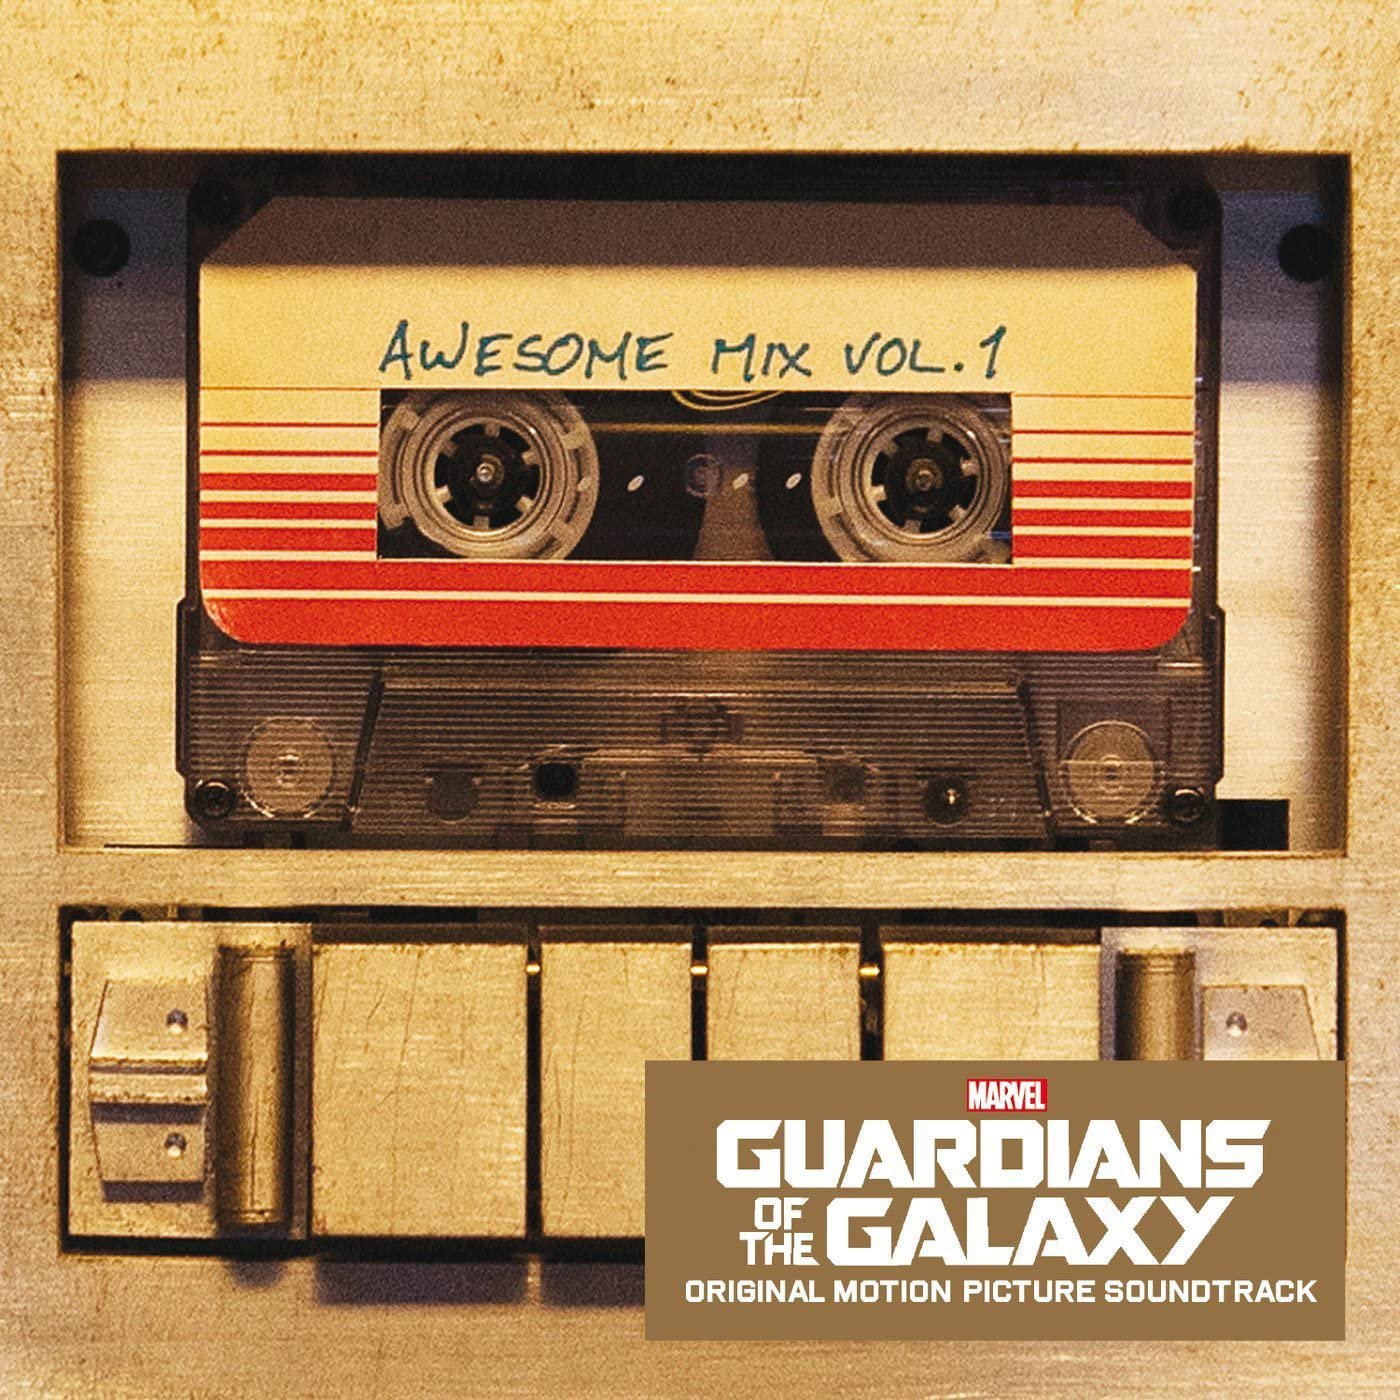 Guardians of the Galaxy Soundtrack Vinyl Review